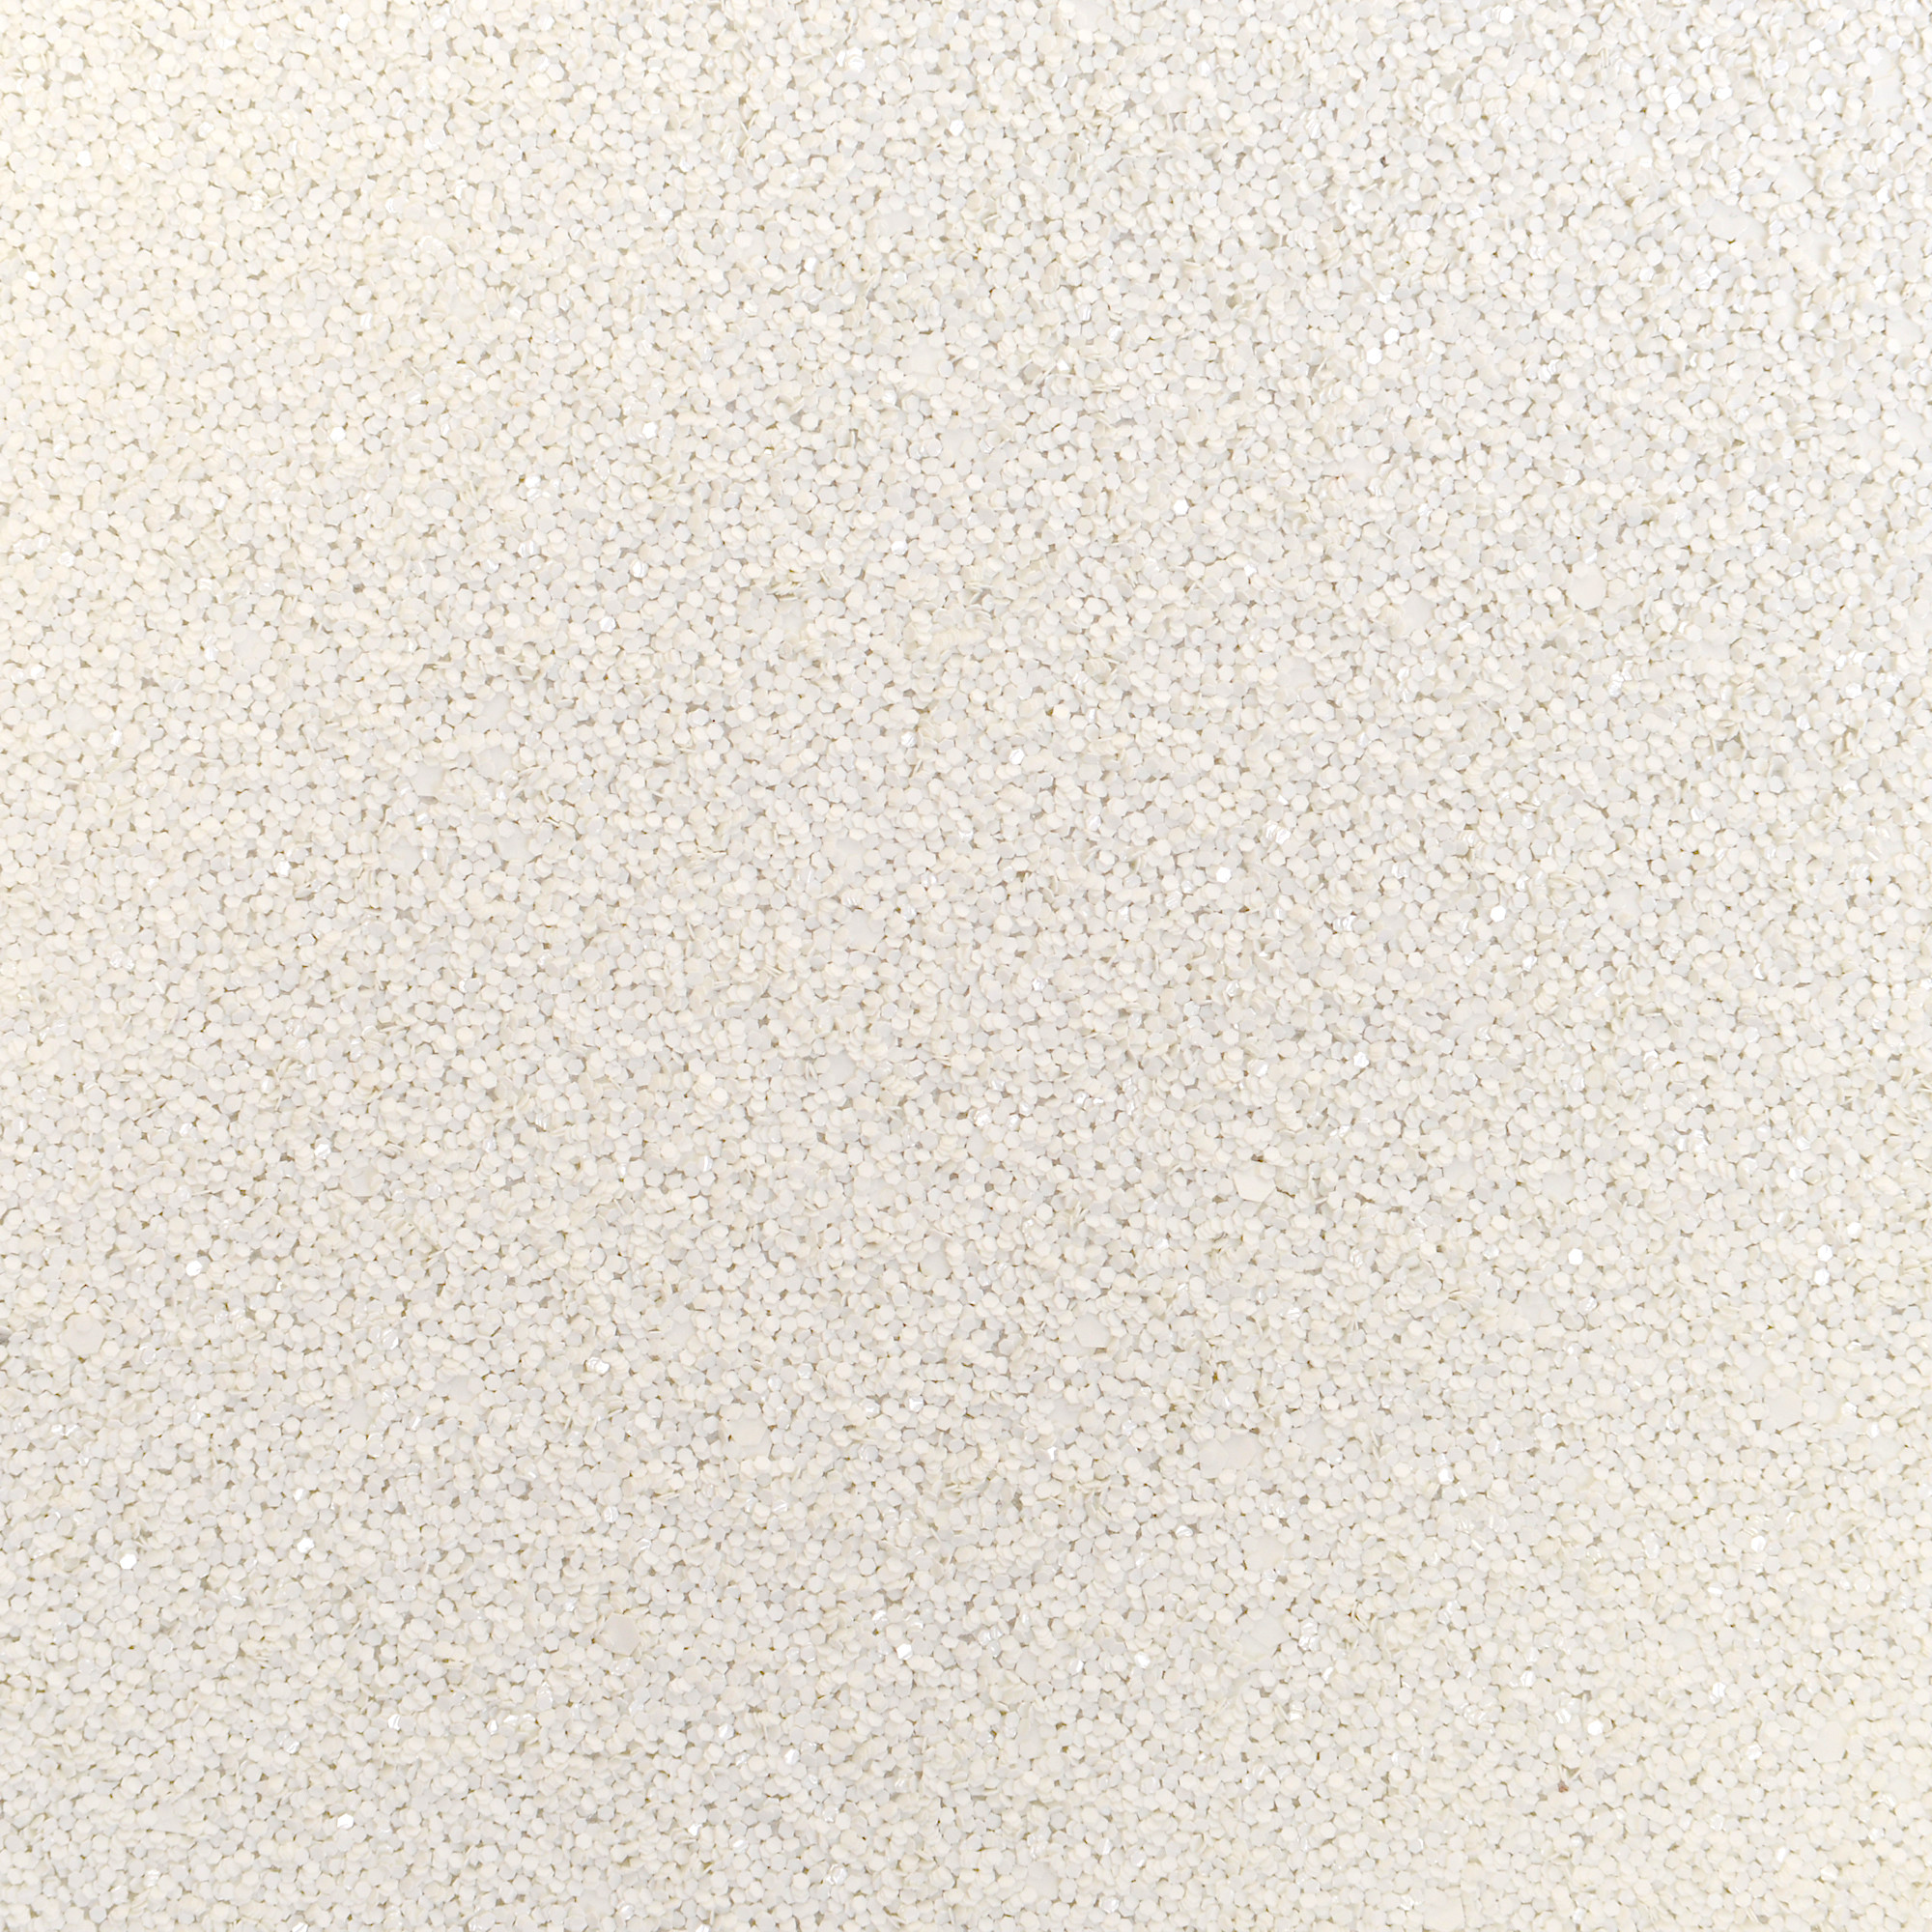 2000x2000 Pearl White Glam Glitter Wall Covering 